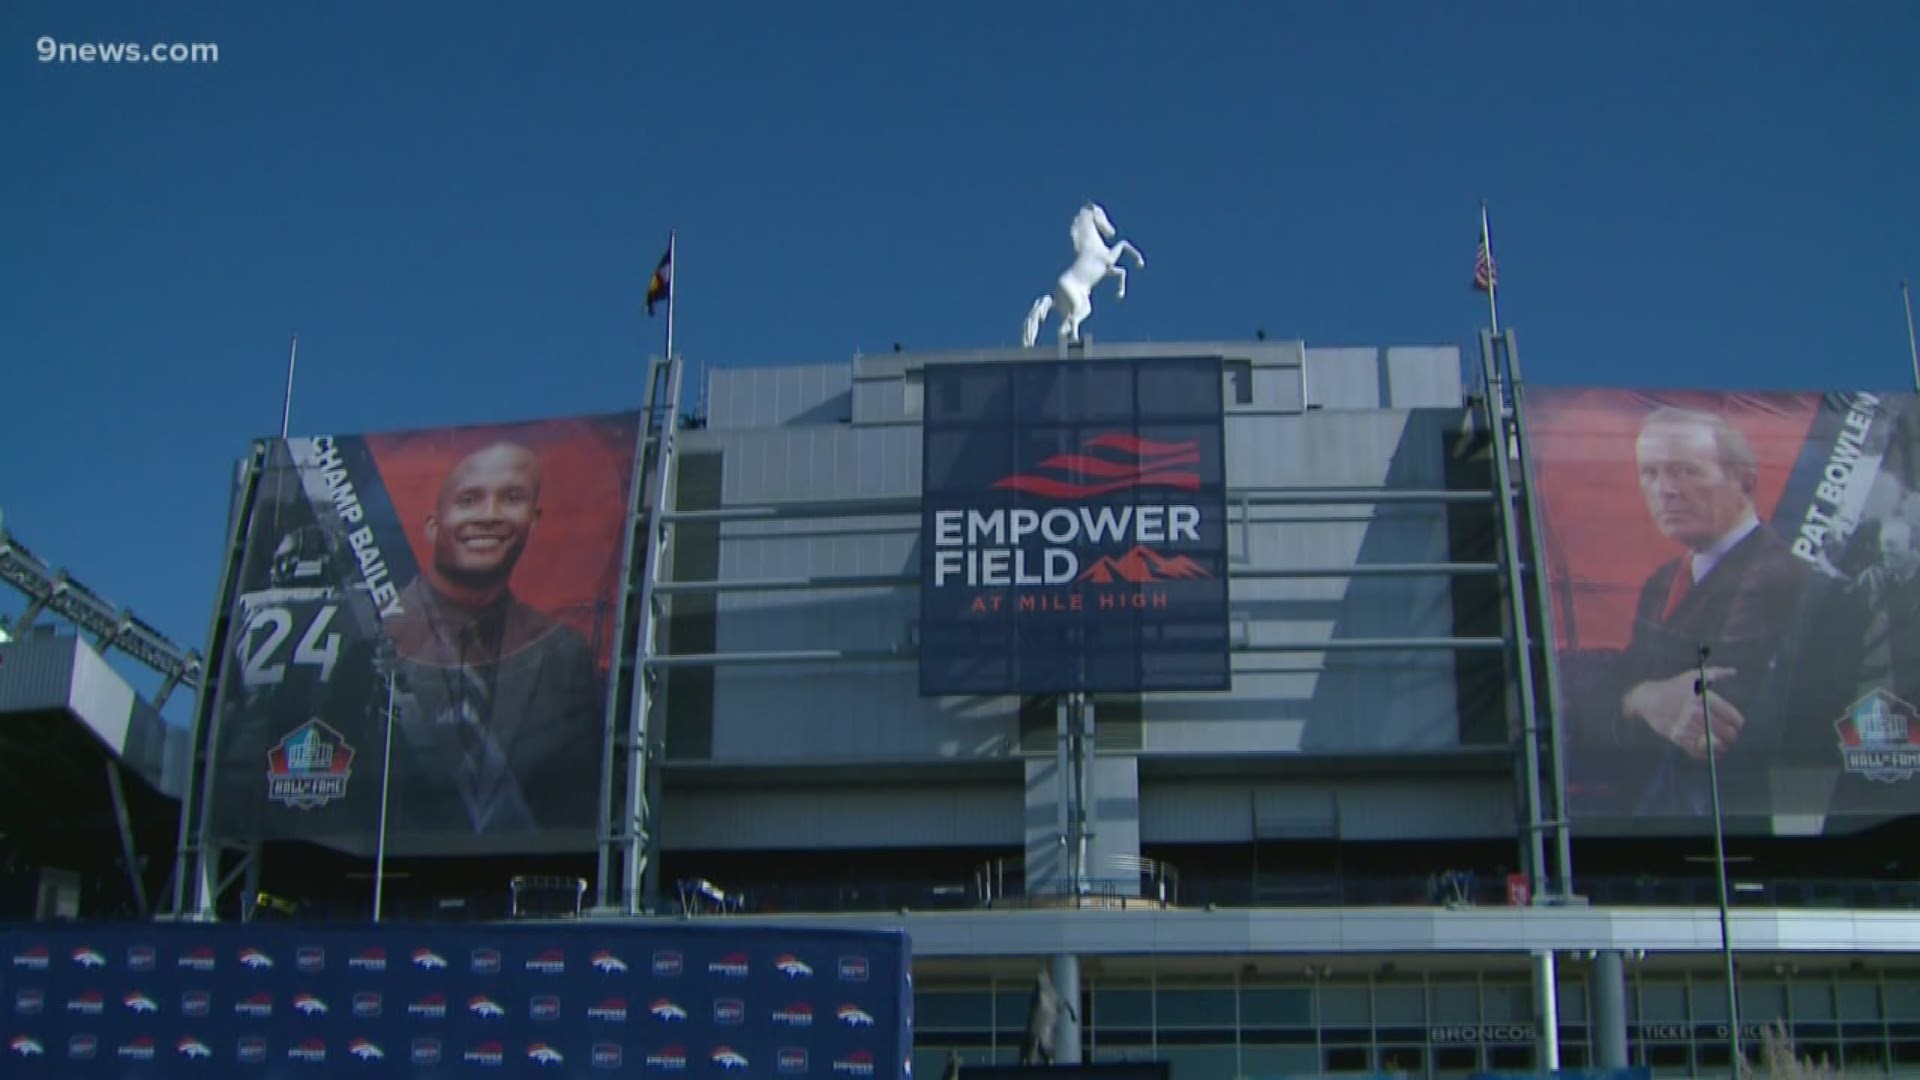 We found out today that the negotiations between the Broncos and Empower started in June. Now, the race begins to plaster that name all over the stadium before the first home game in 10 days.